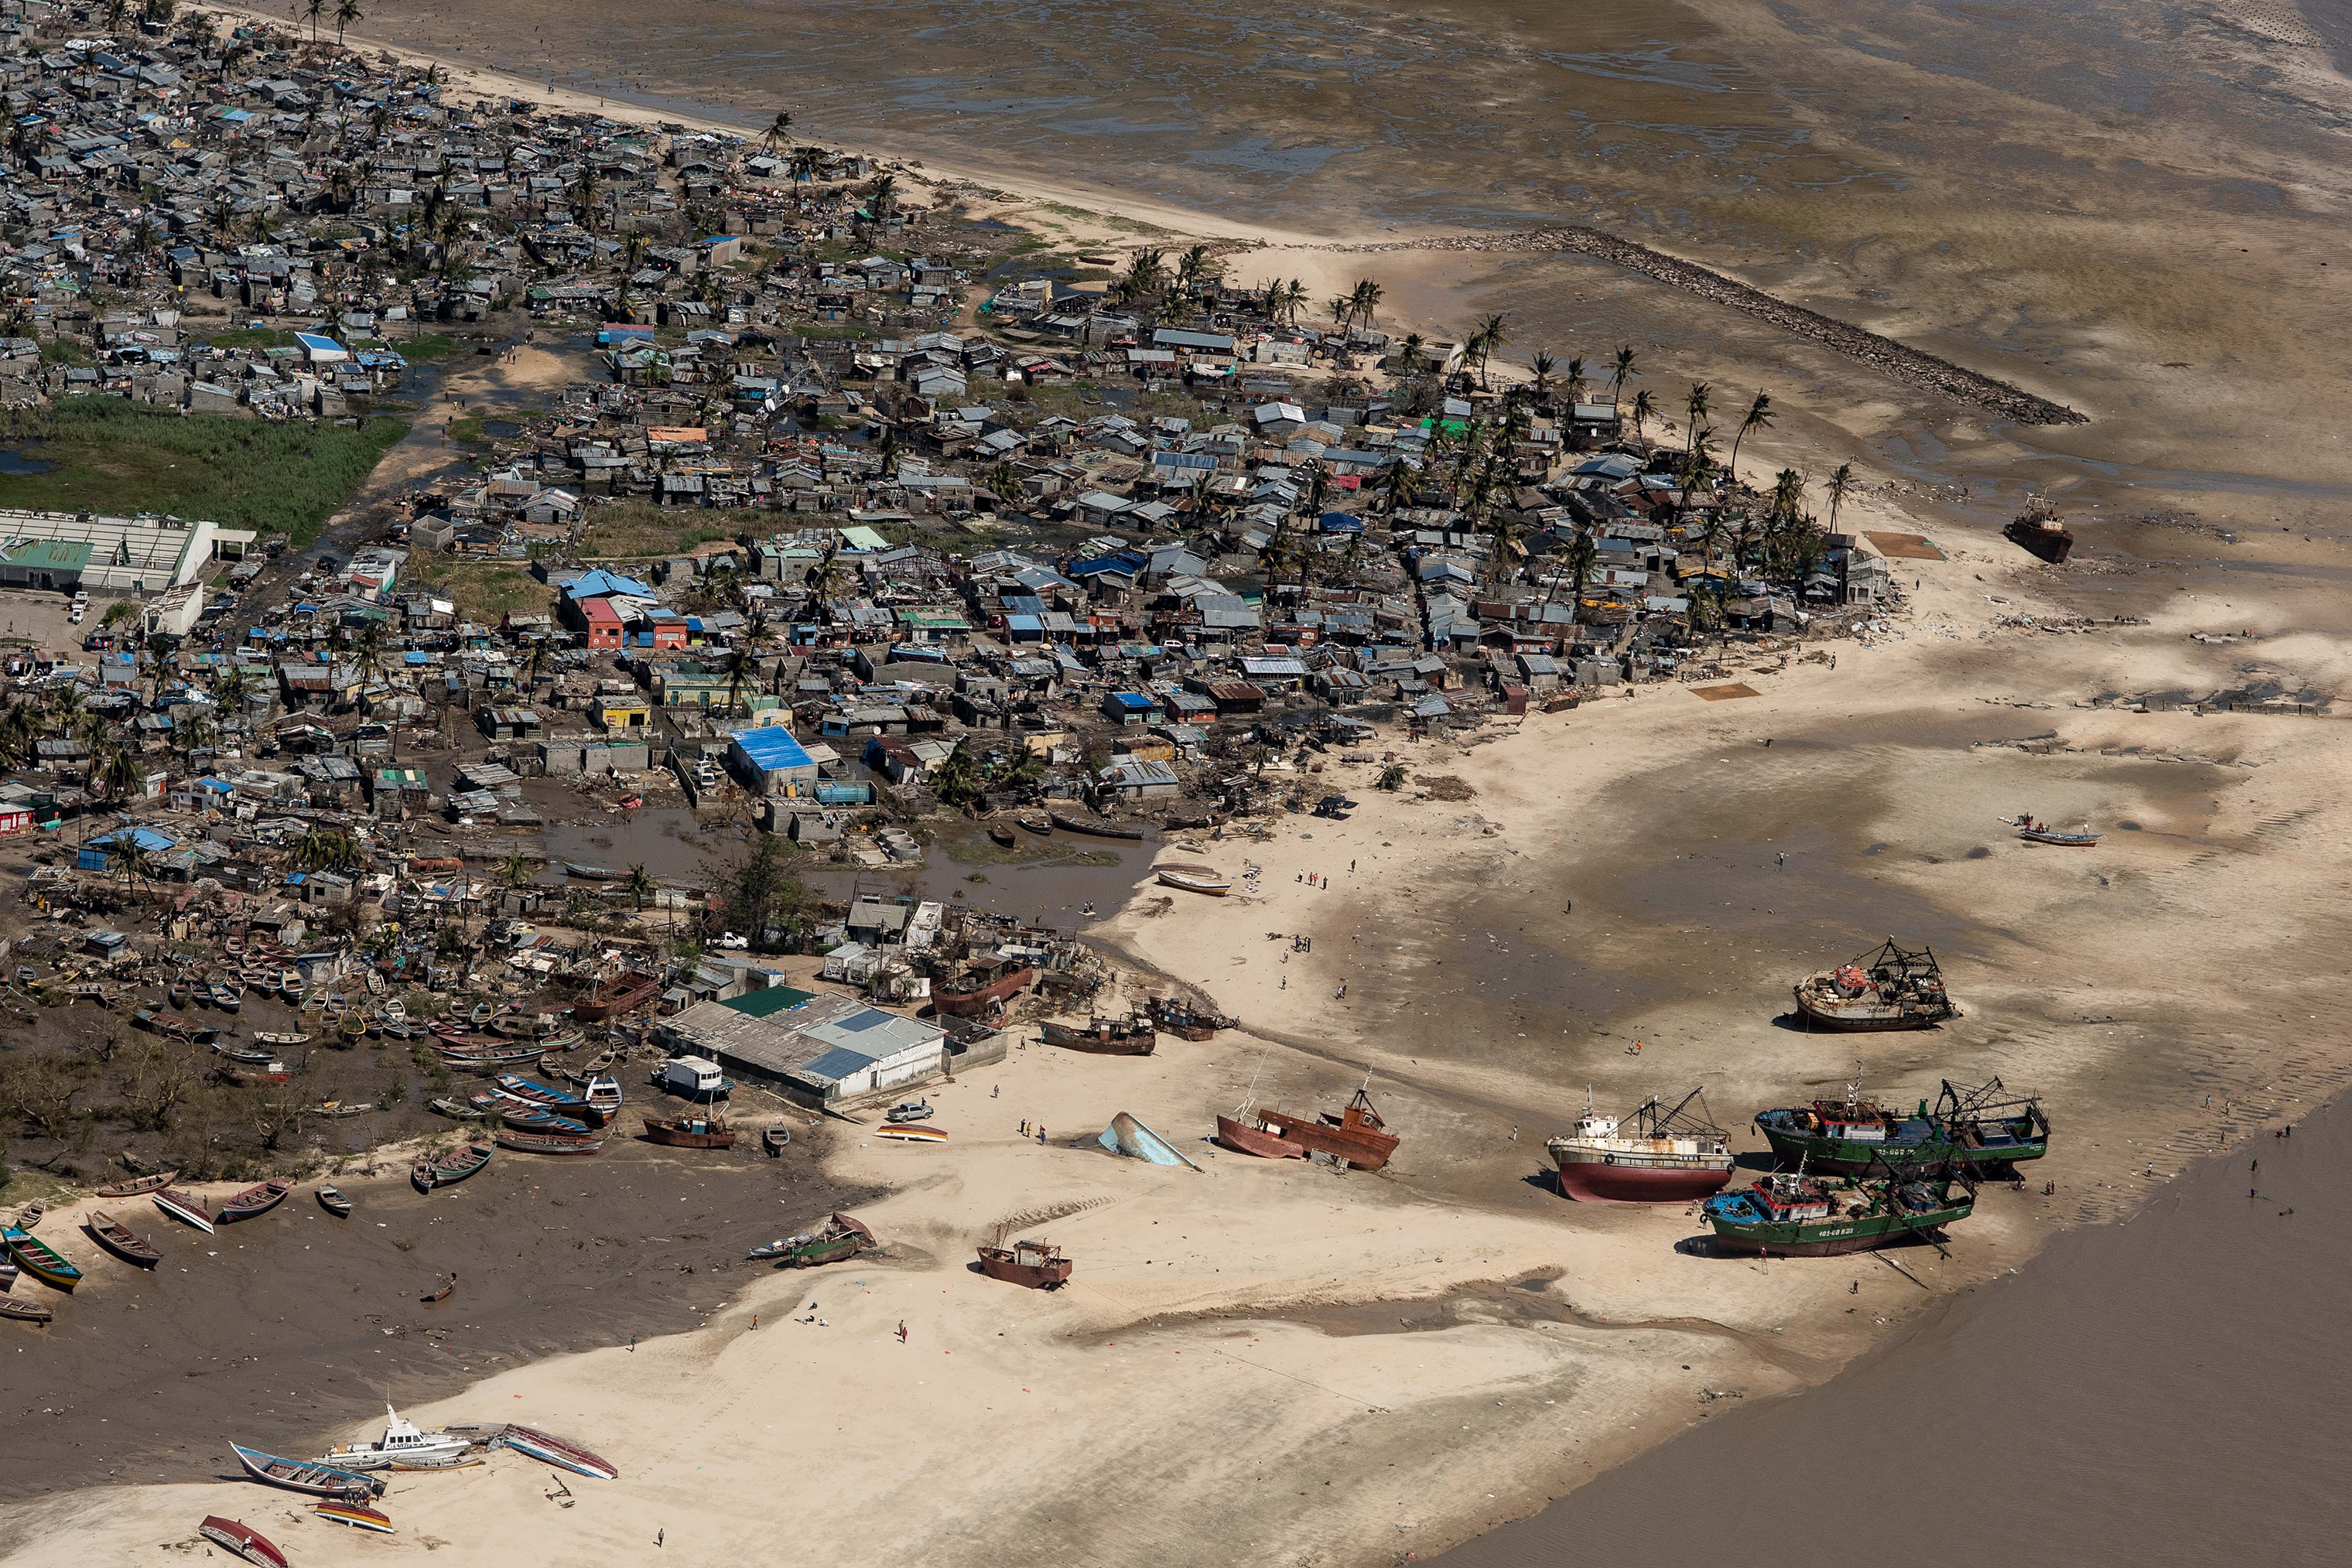 An aerial view of a neighborhood affected by Cyclone Idai on March 24, 2019 in Beira, Mozambique. (Andrew Renneisen—Getty Images)